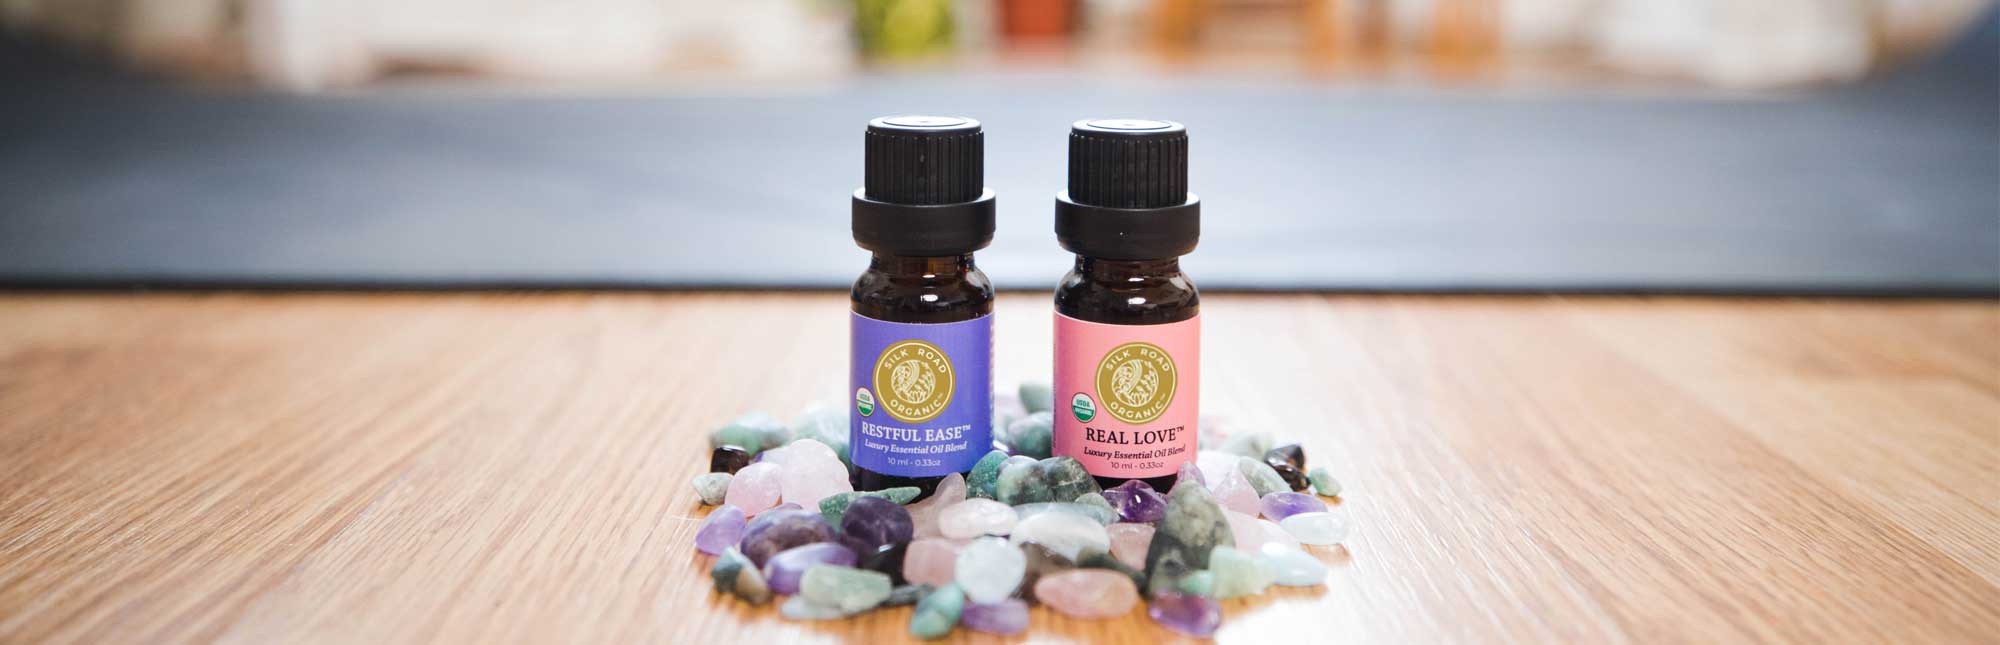 natural organic stress relief restful ease real love essential oil diffuser blend